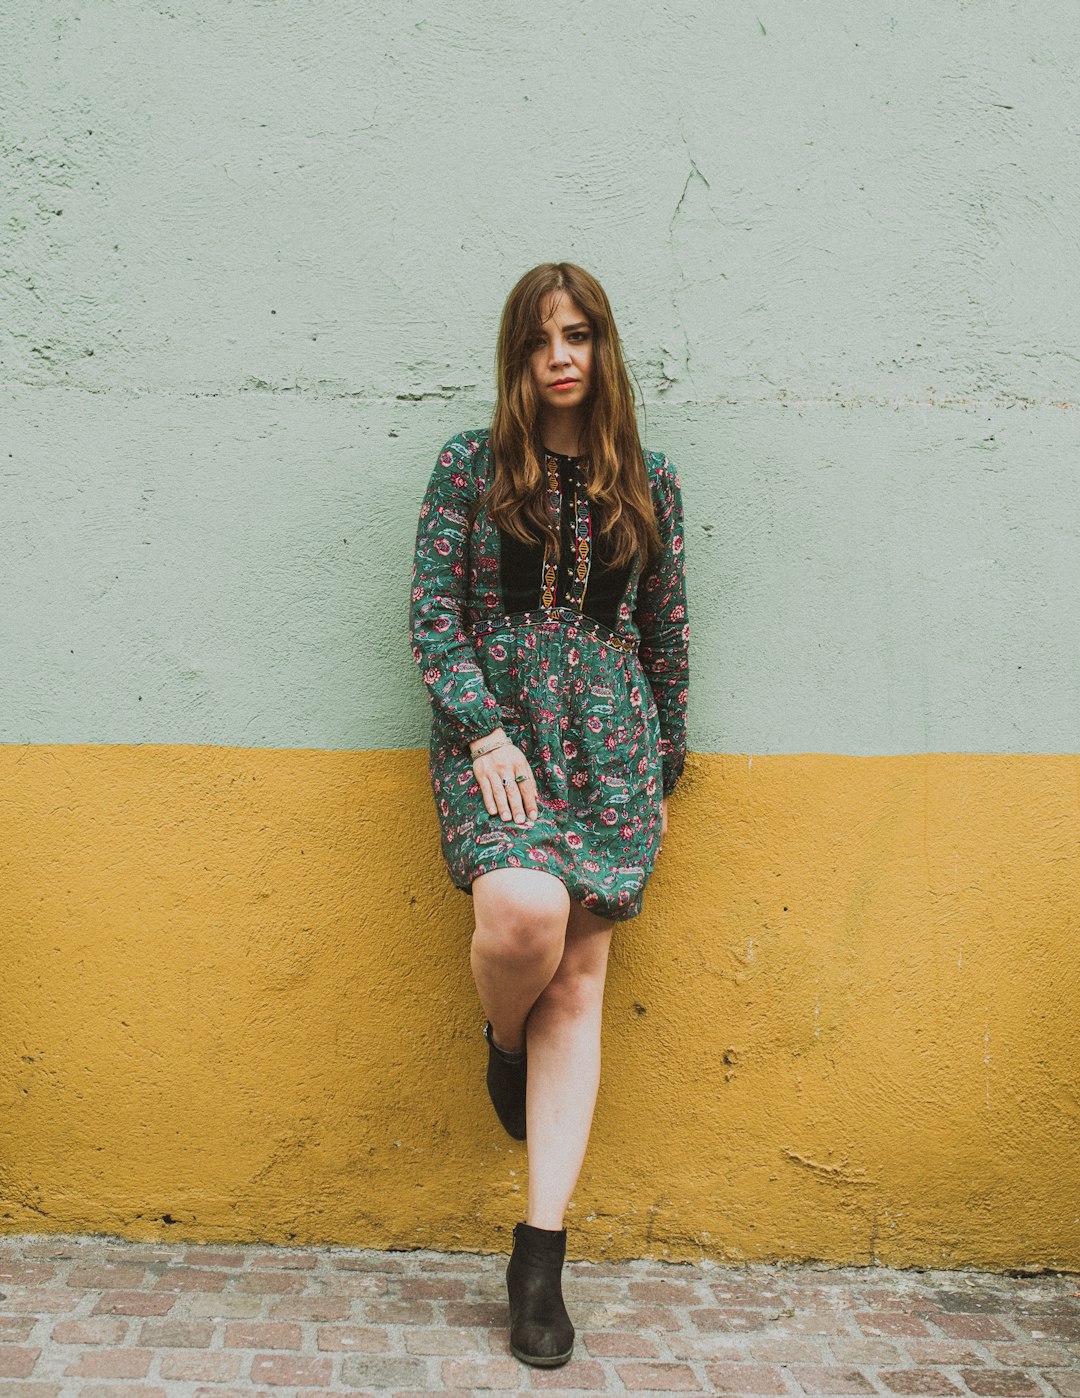 woman in green floral dress standing and leaning on concrete gray painted wall during daytime